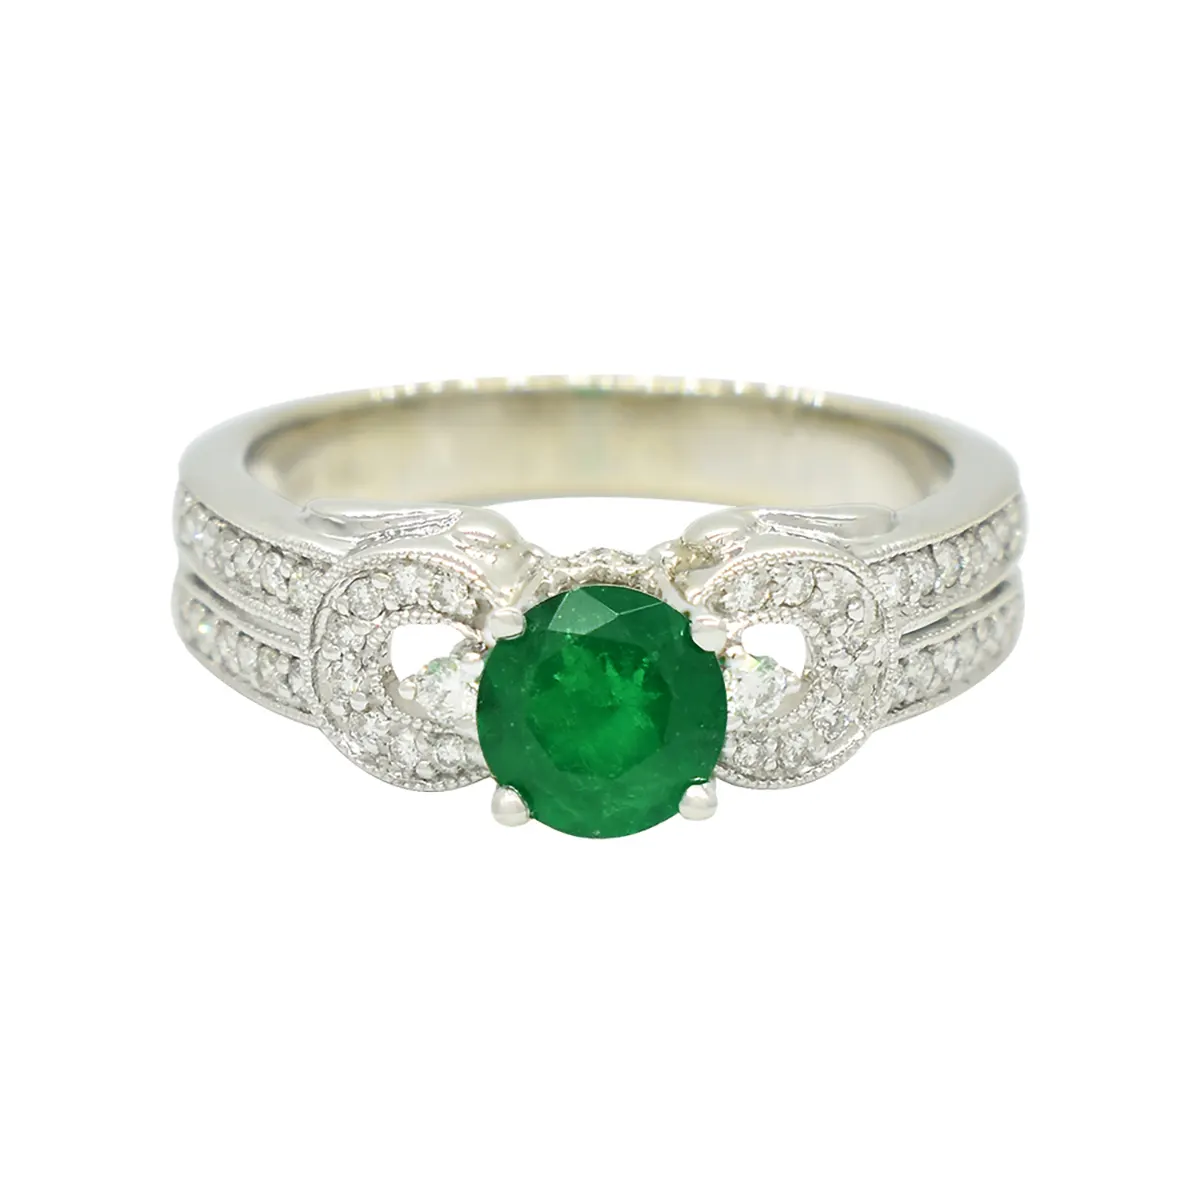 emerald-ring-in-14k-white-gold-with-44-round-diamonds-in-micro-pave-setting